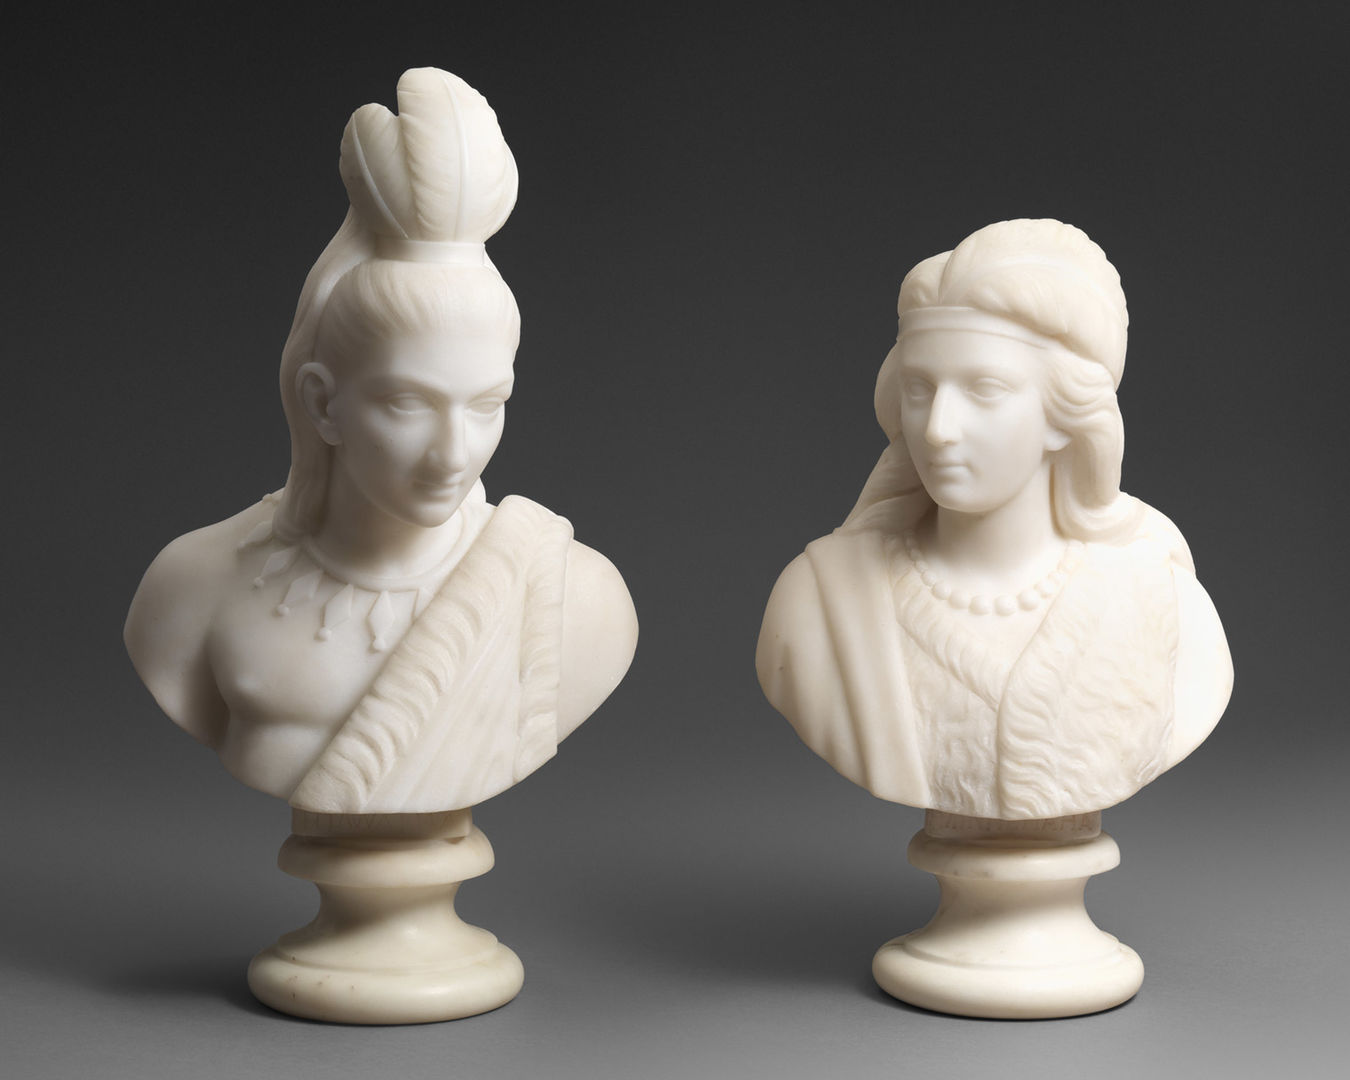 Two sculptural busts, one of a man and the other a woman, both wearing Indigenous dress